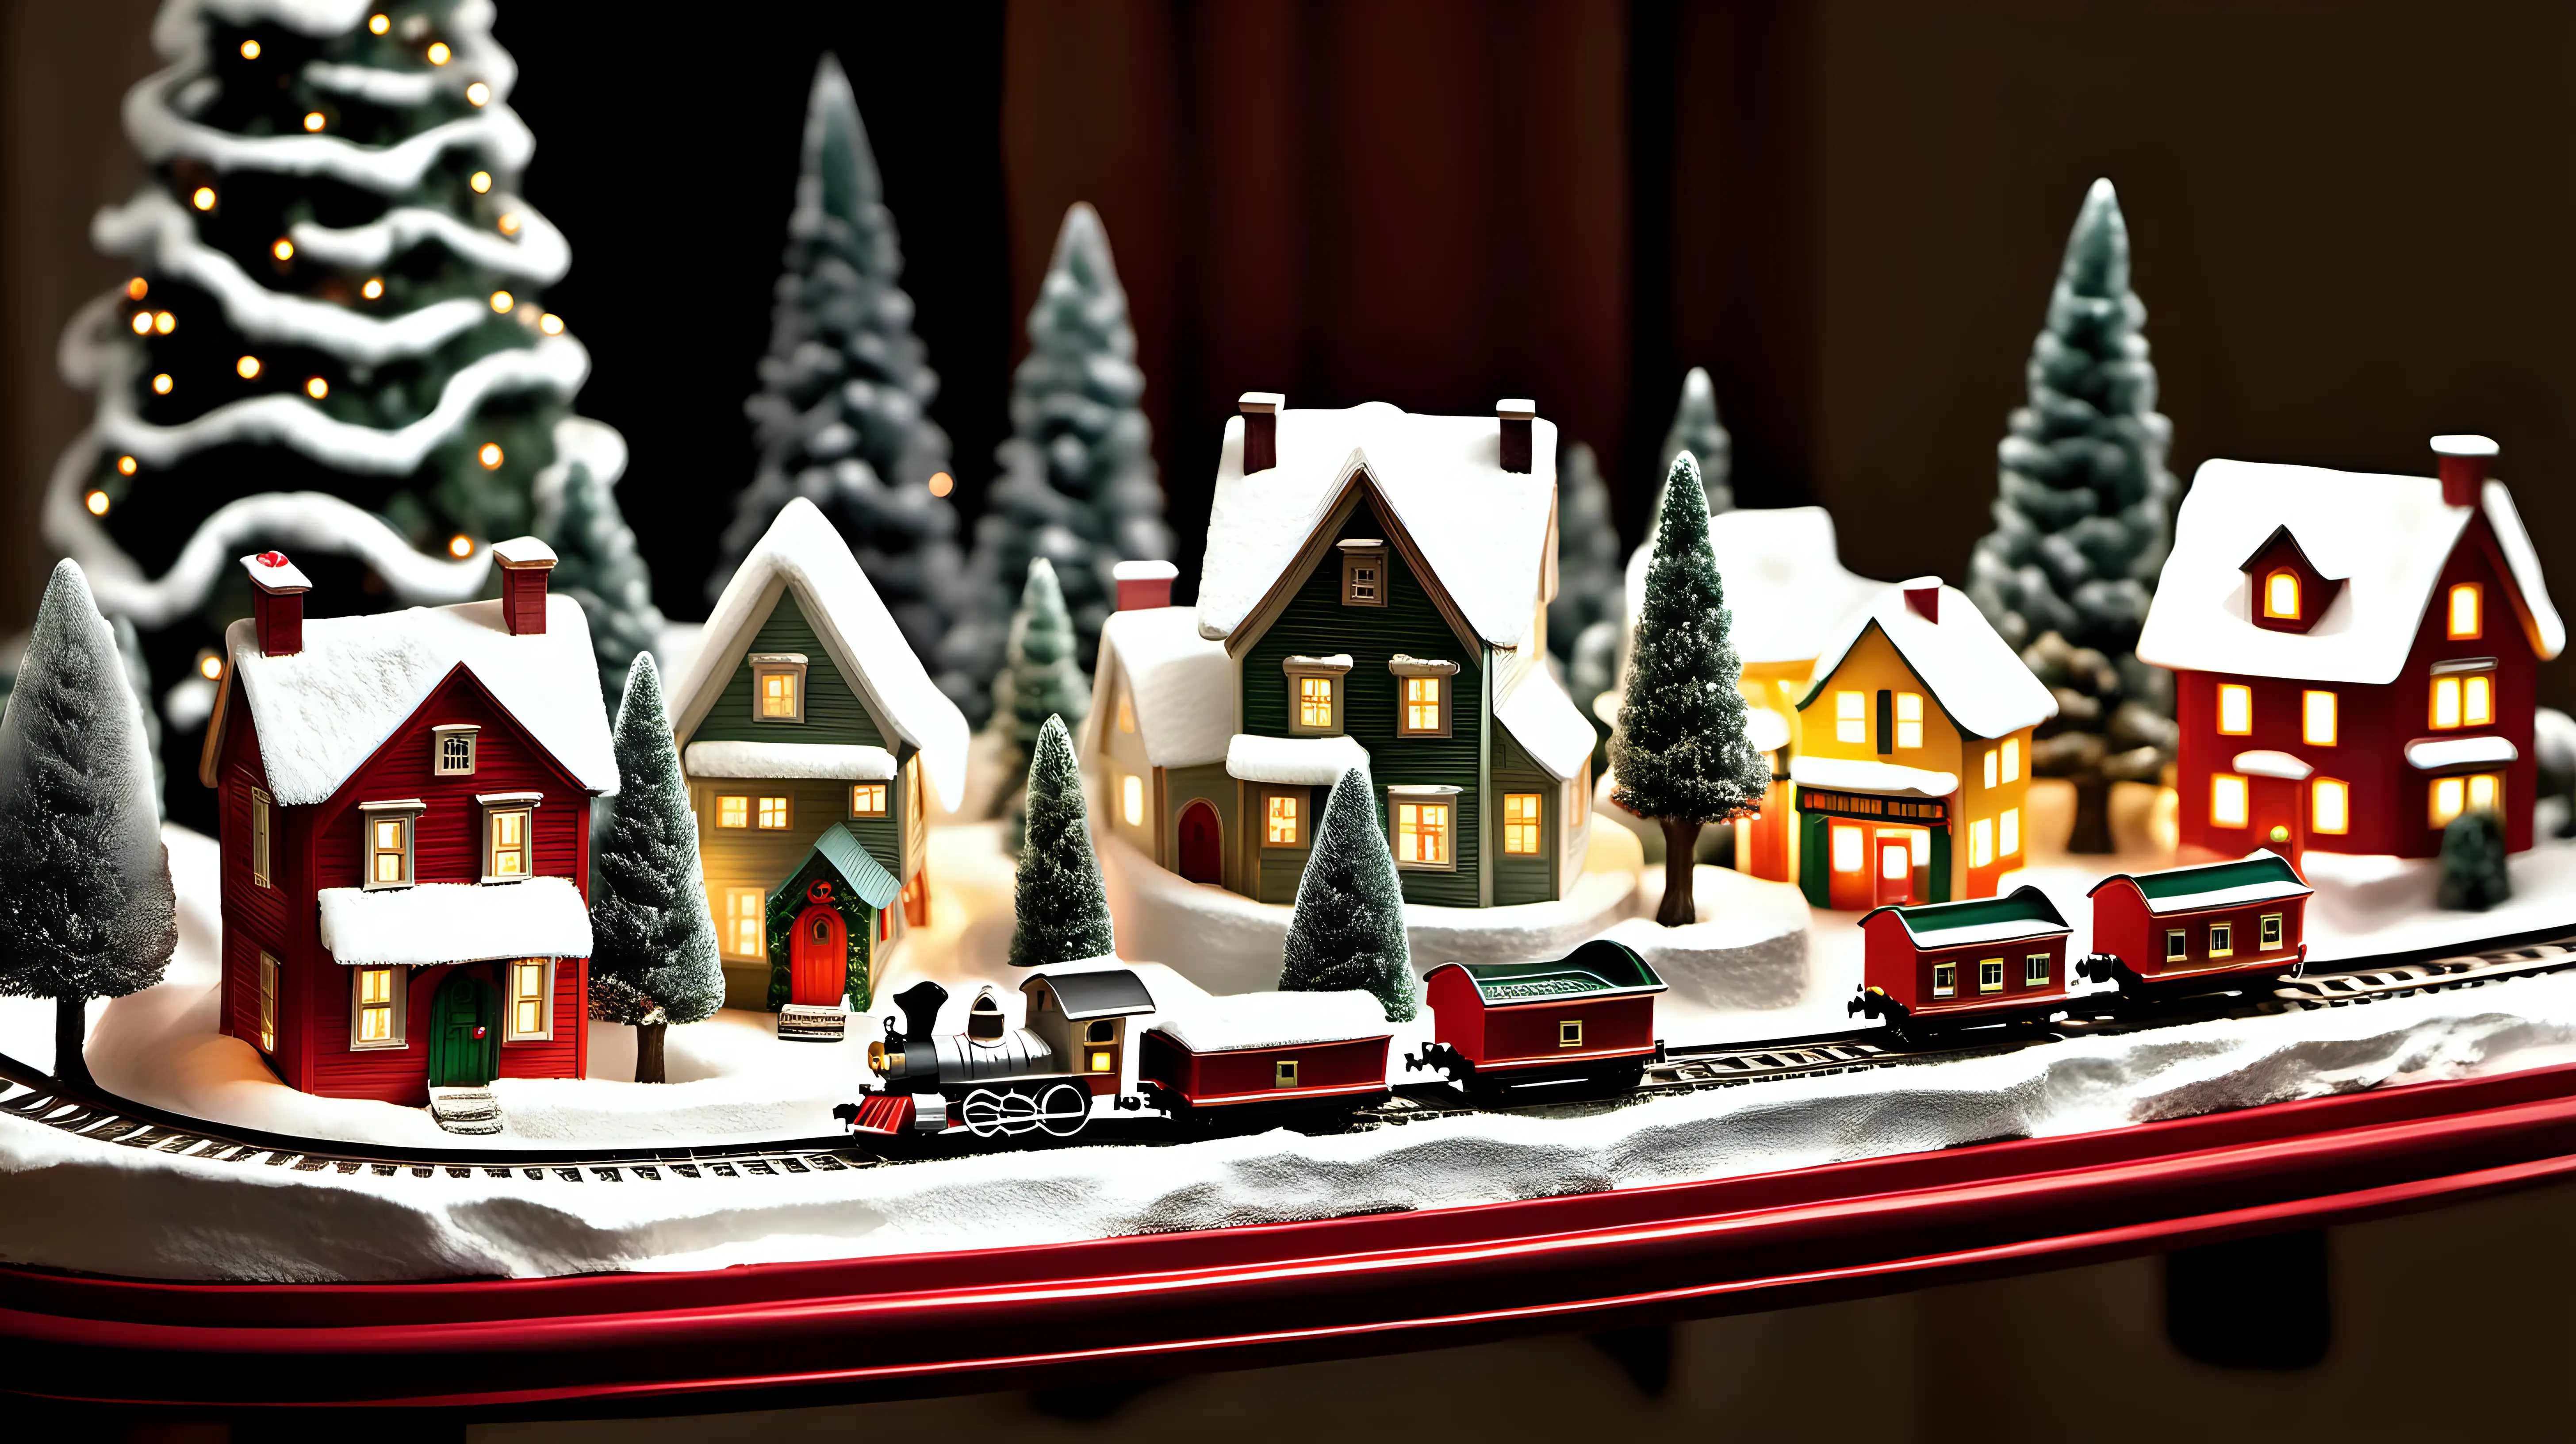 Enchanting Miniature Christmas Village Display with Sparkling Lights and Toy Train